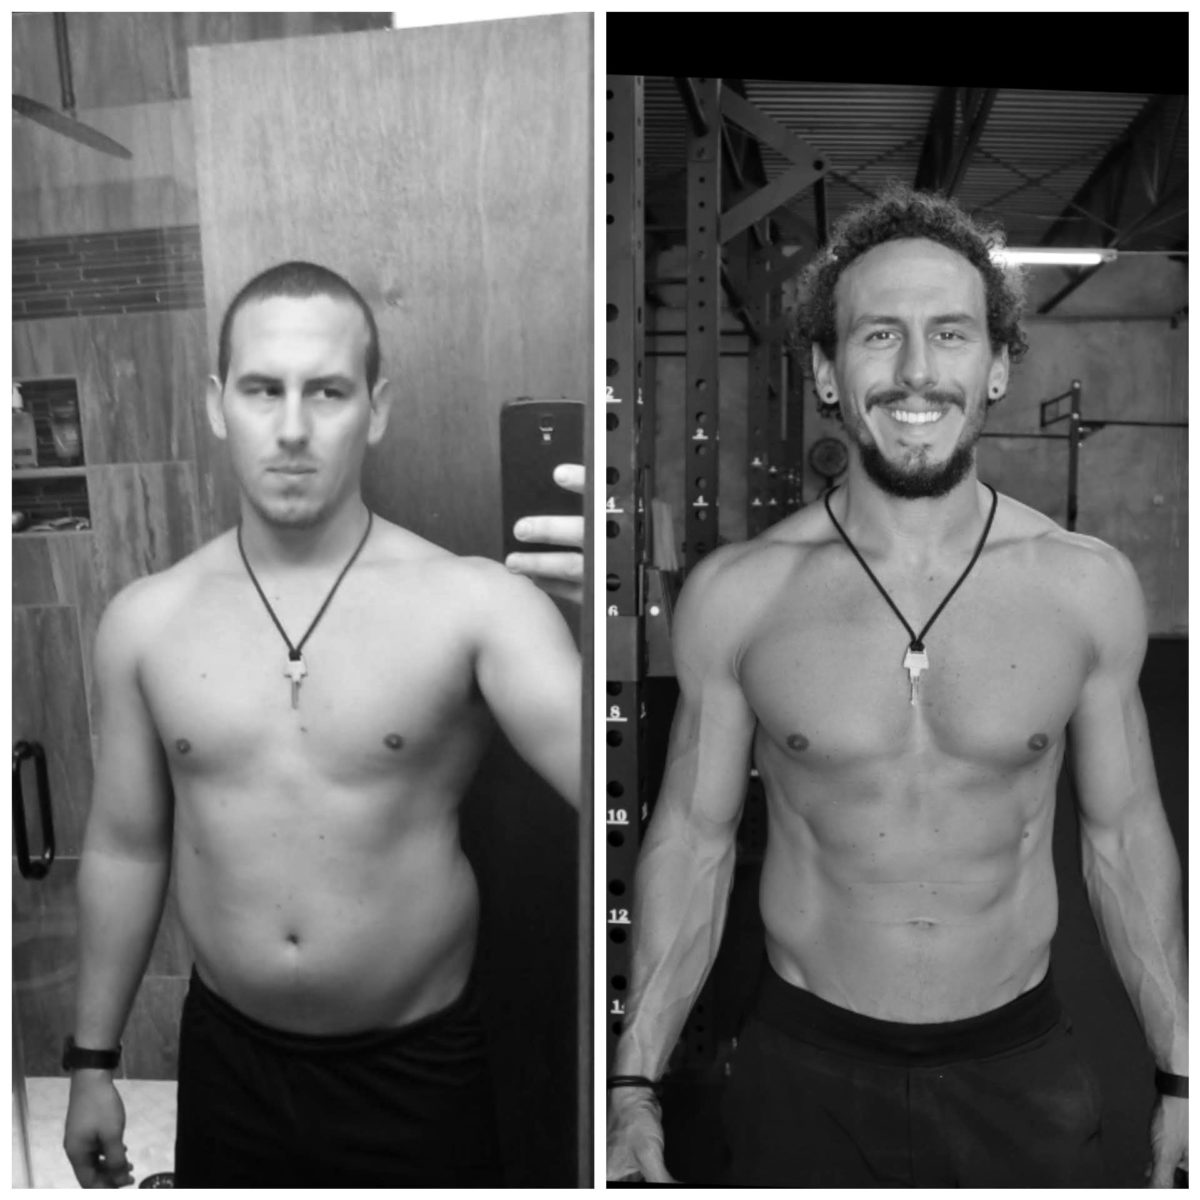 me on the left before i decided to stop using a scale and on the right is a smiling man who decided to stop using a scale and is shirtless and more muscular